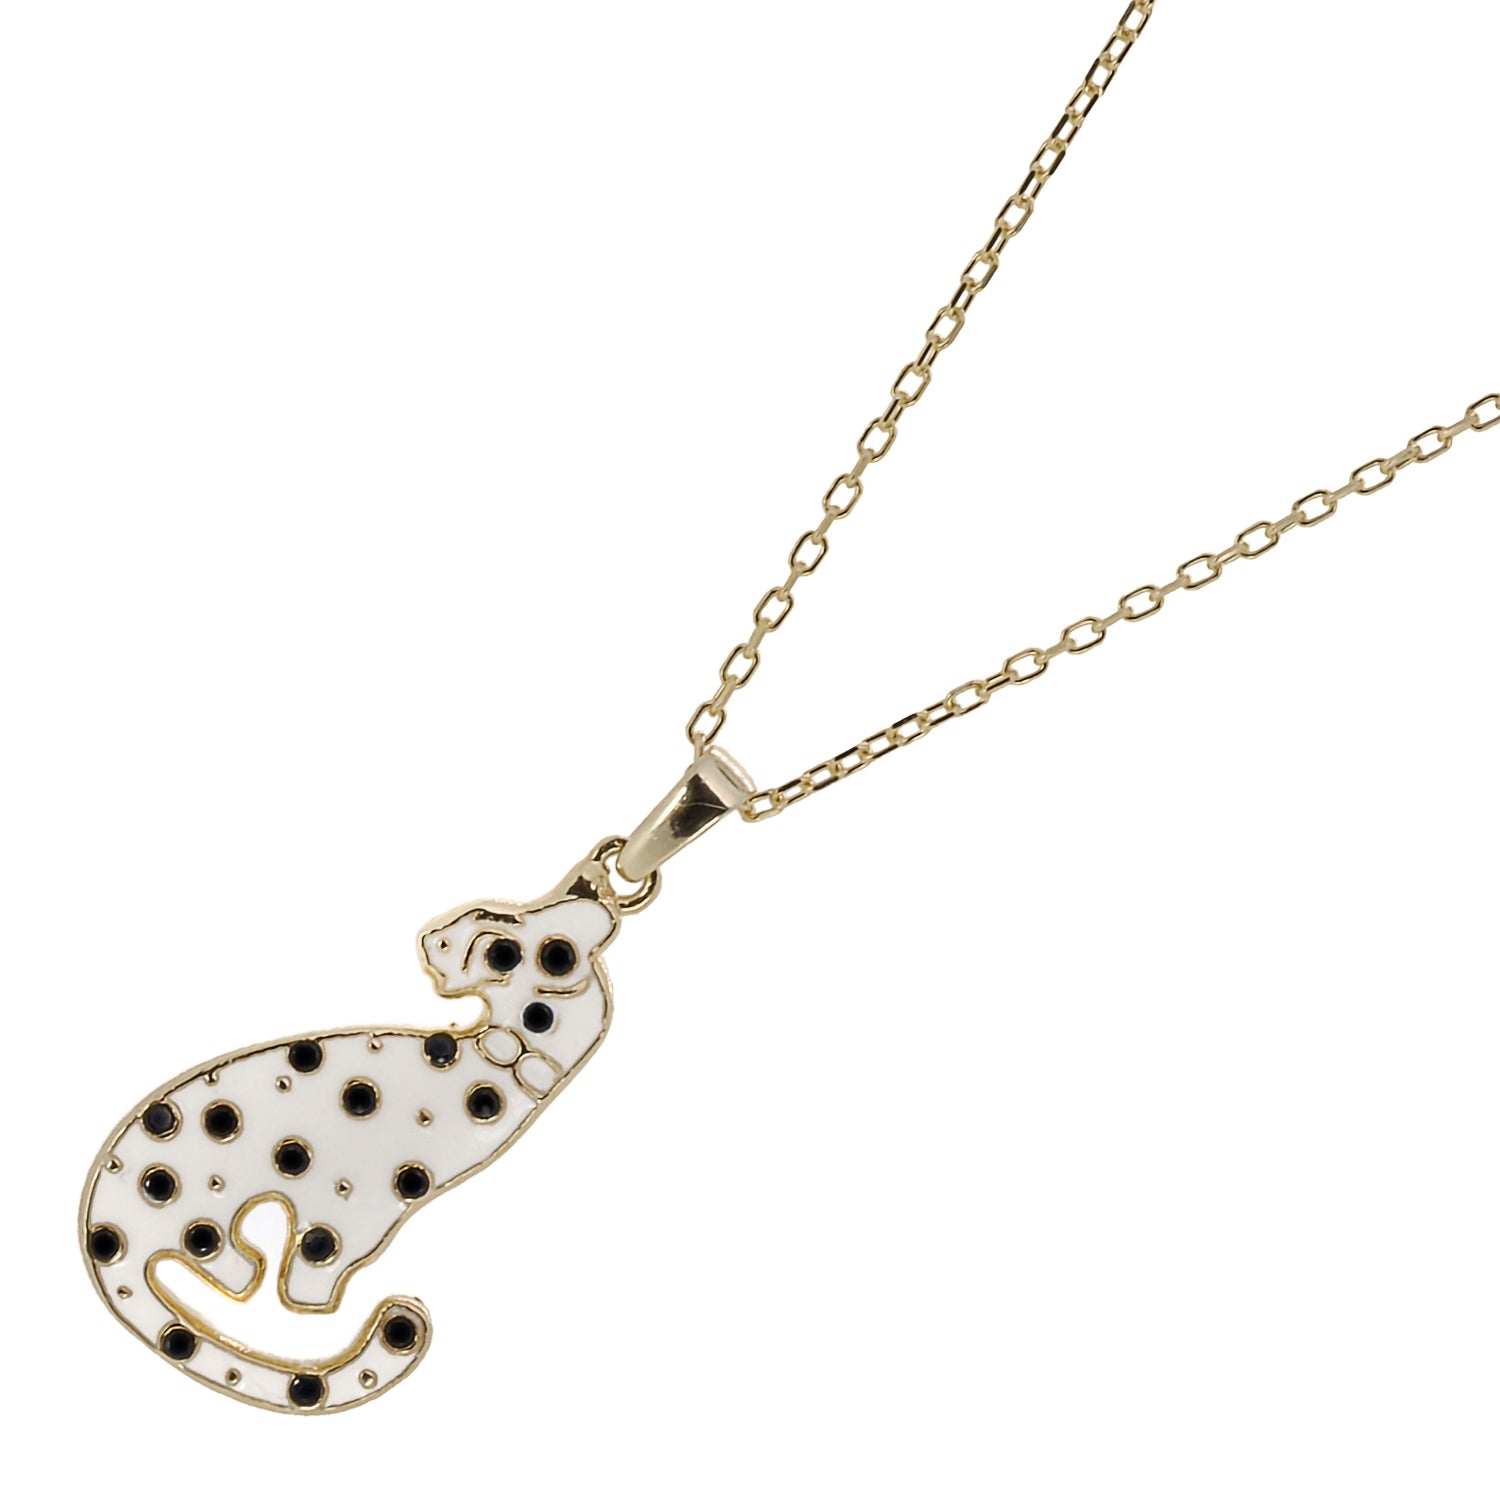 Gold Dalmatian Necklace, a whimsical and stylish accessory for dog lovers and a symbol of love and devotion to our furry friends.